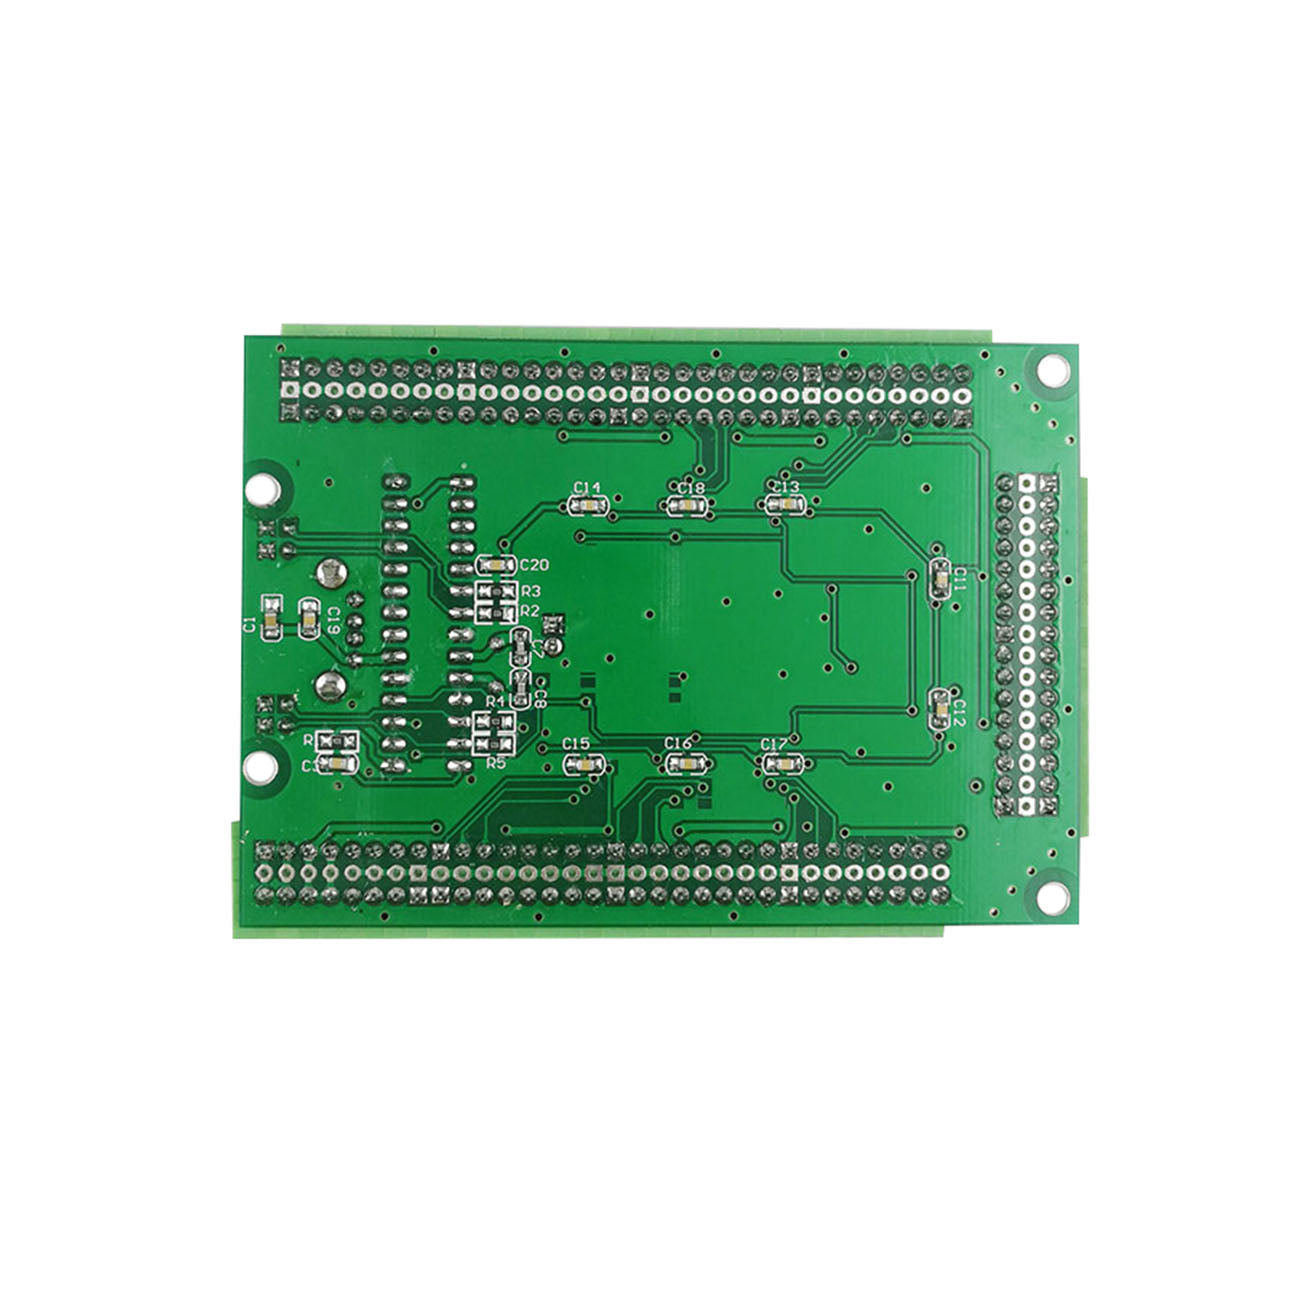 MACH3 USB hid Manual control extended current board Do not install screw versions Analog voltage (0-5v) to digital quantity